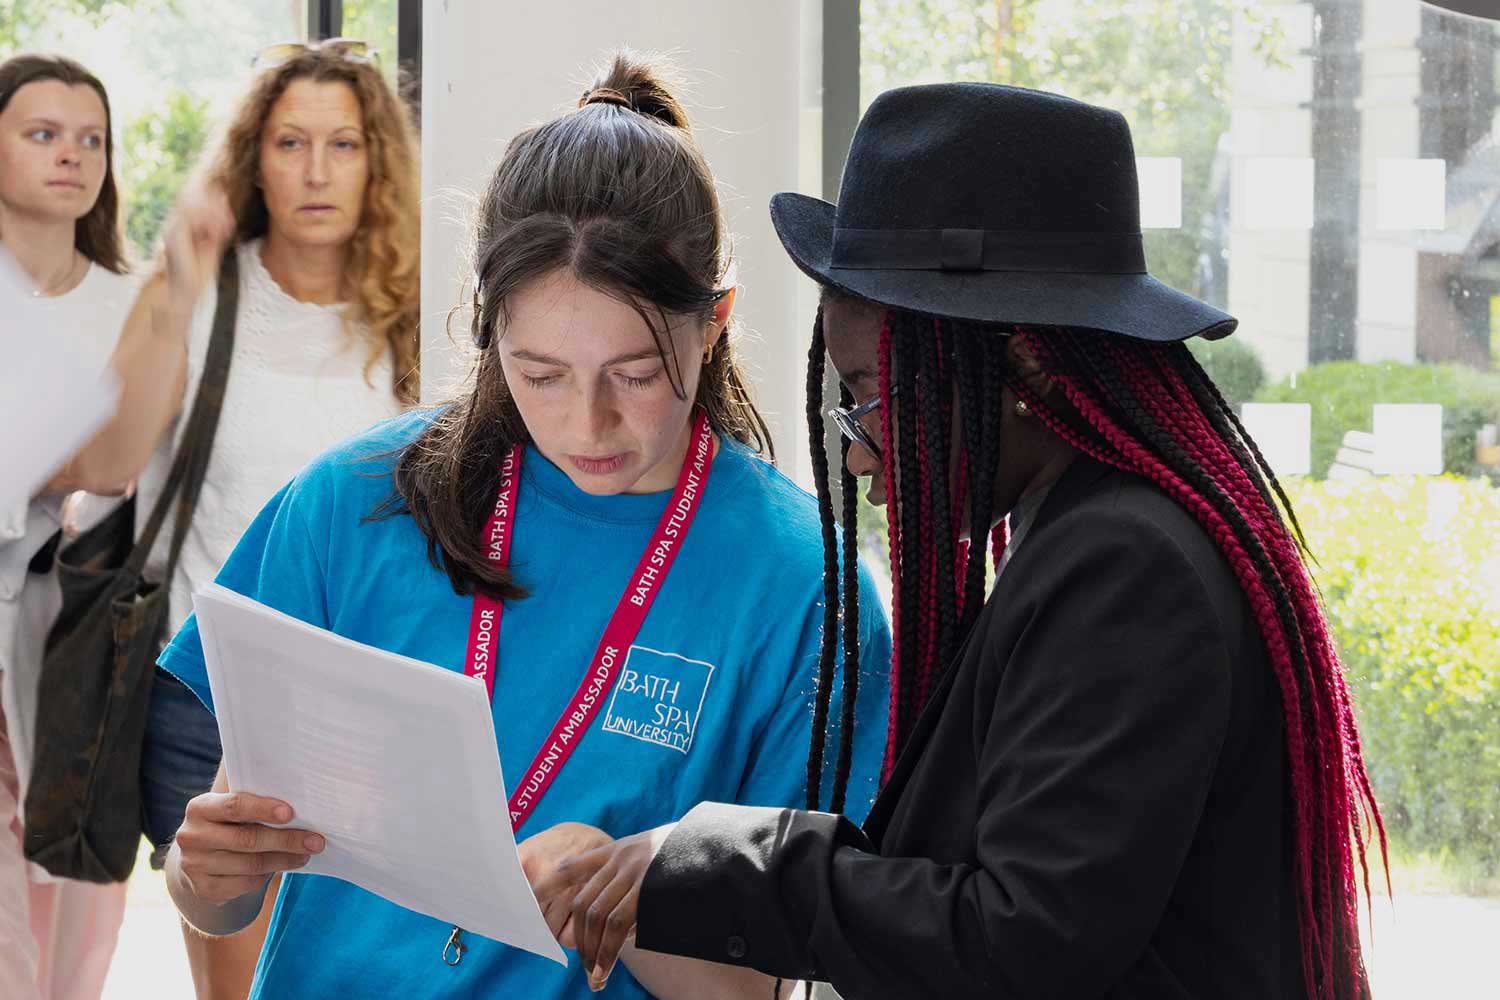 A Student Ambassador helps a visitor at an Open Day